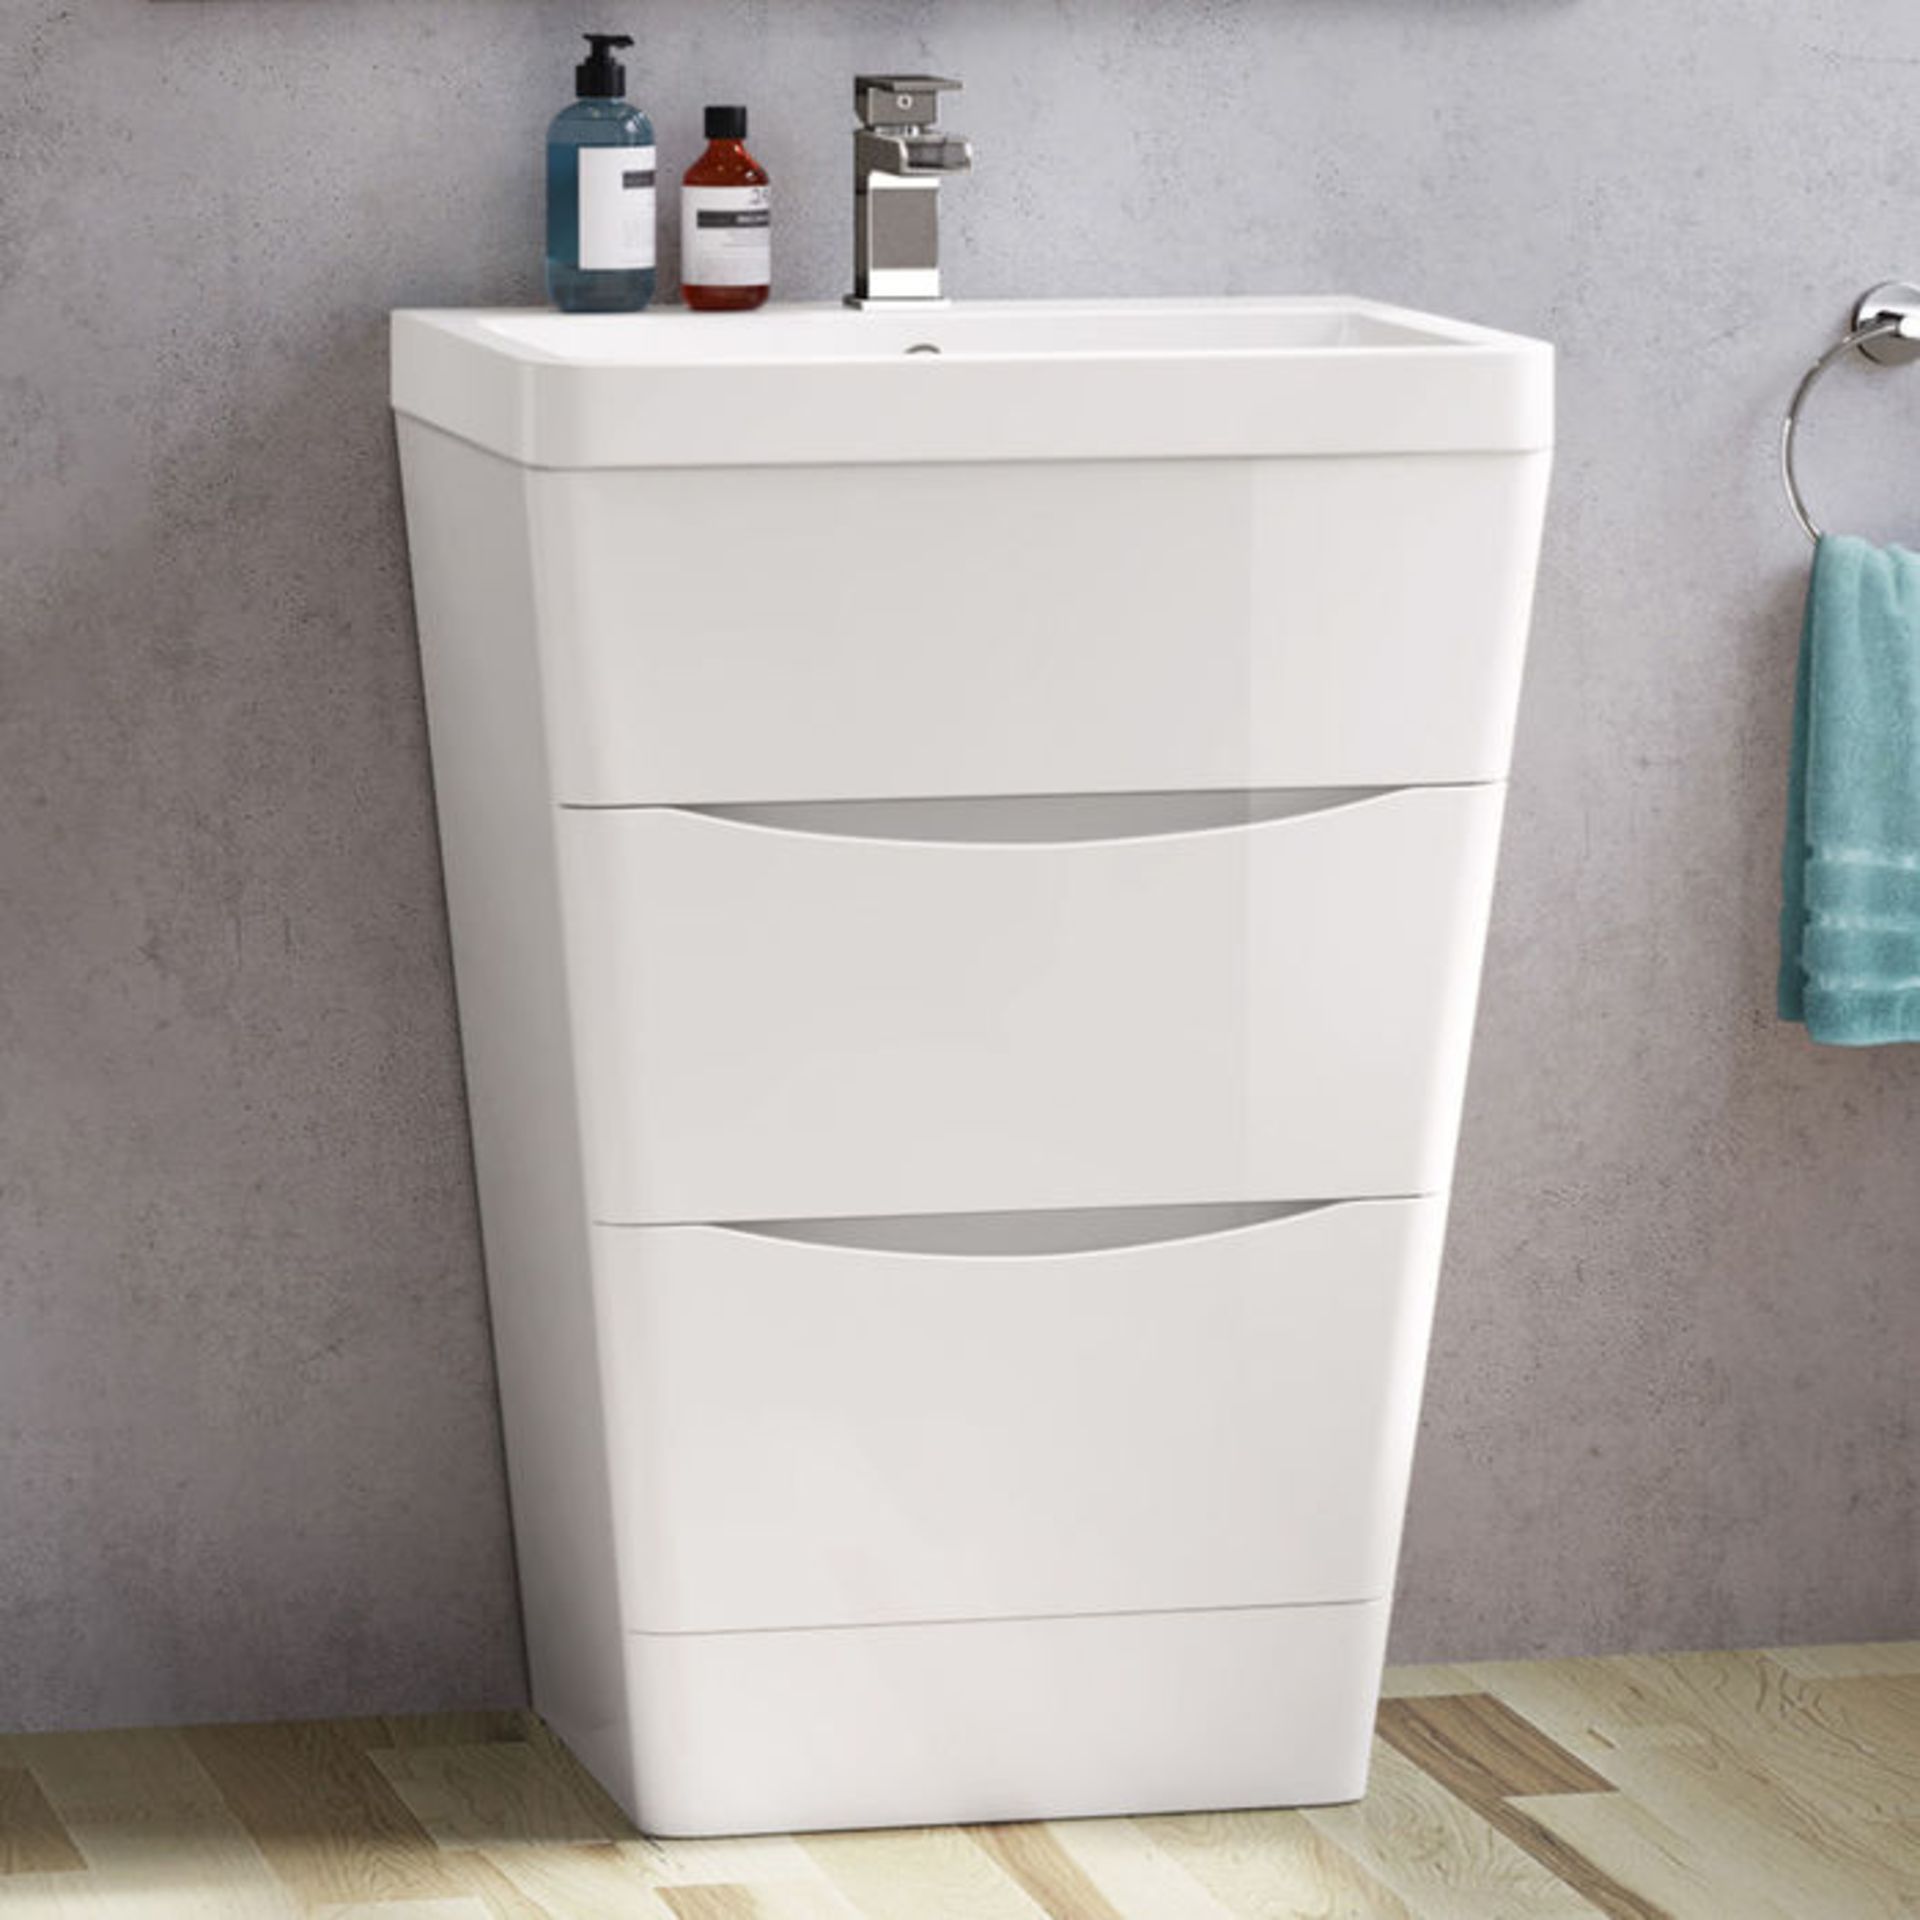 NEW & BOXED 600mm Austin II Gloss White Built In Basin Drawer Unit - Floor Standing. RRP £799... - Image 3 of 3